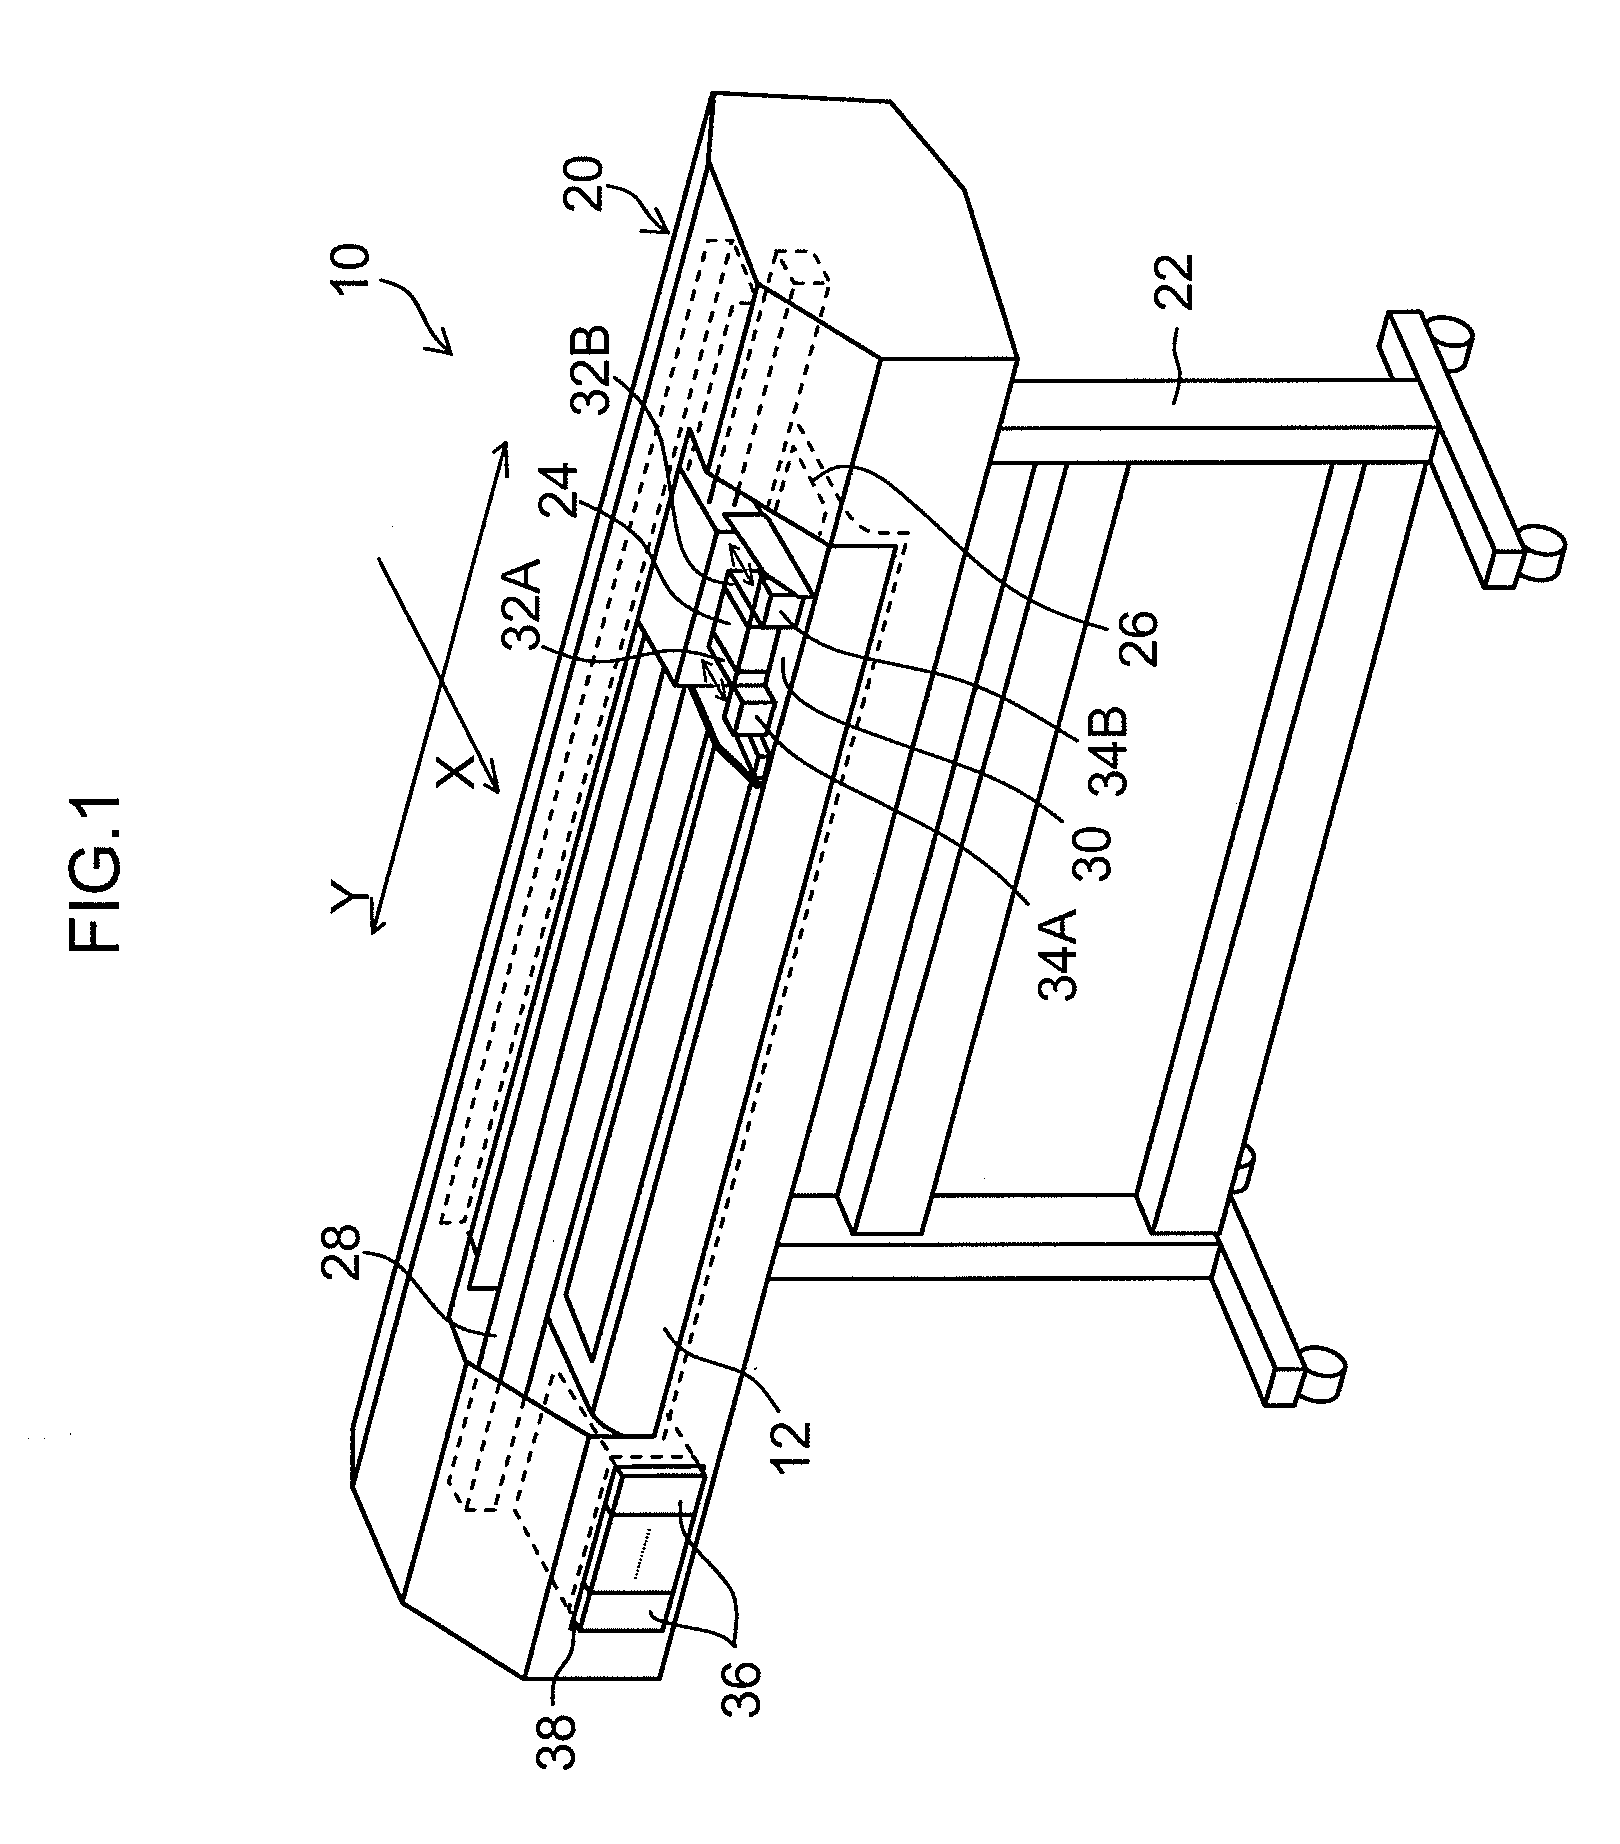 Inkjet recording apparatus and image forming method